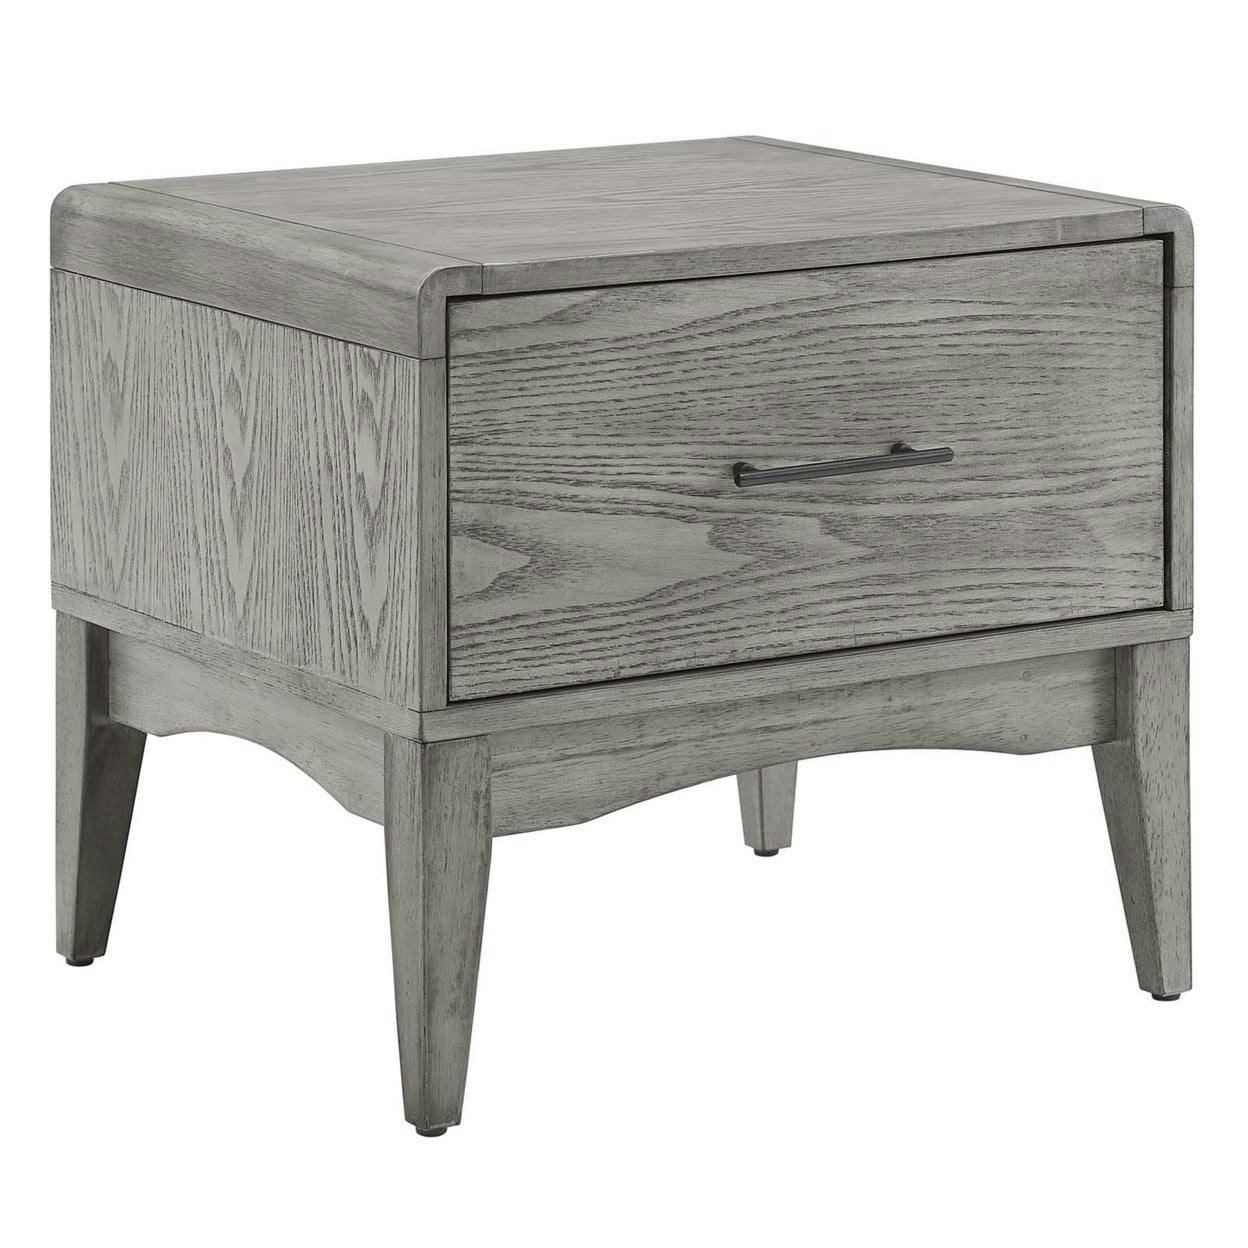 Georgia Gray Rubberwood Nightstand with Full-Extension Drawer